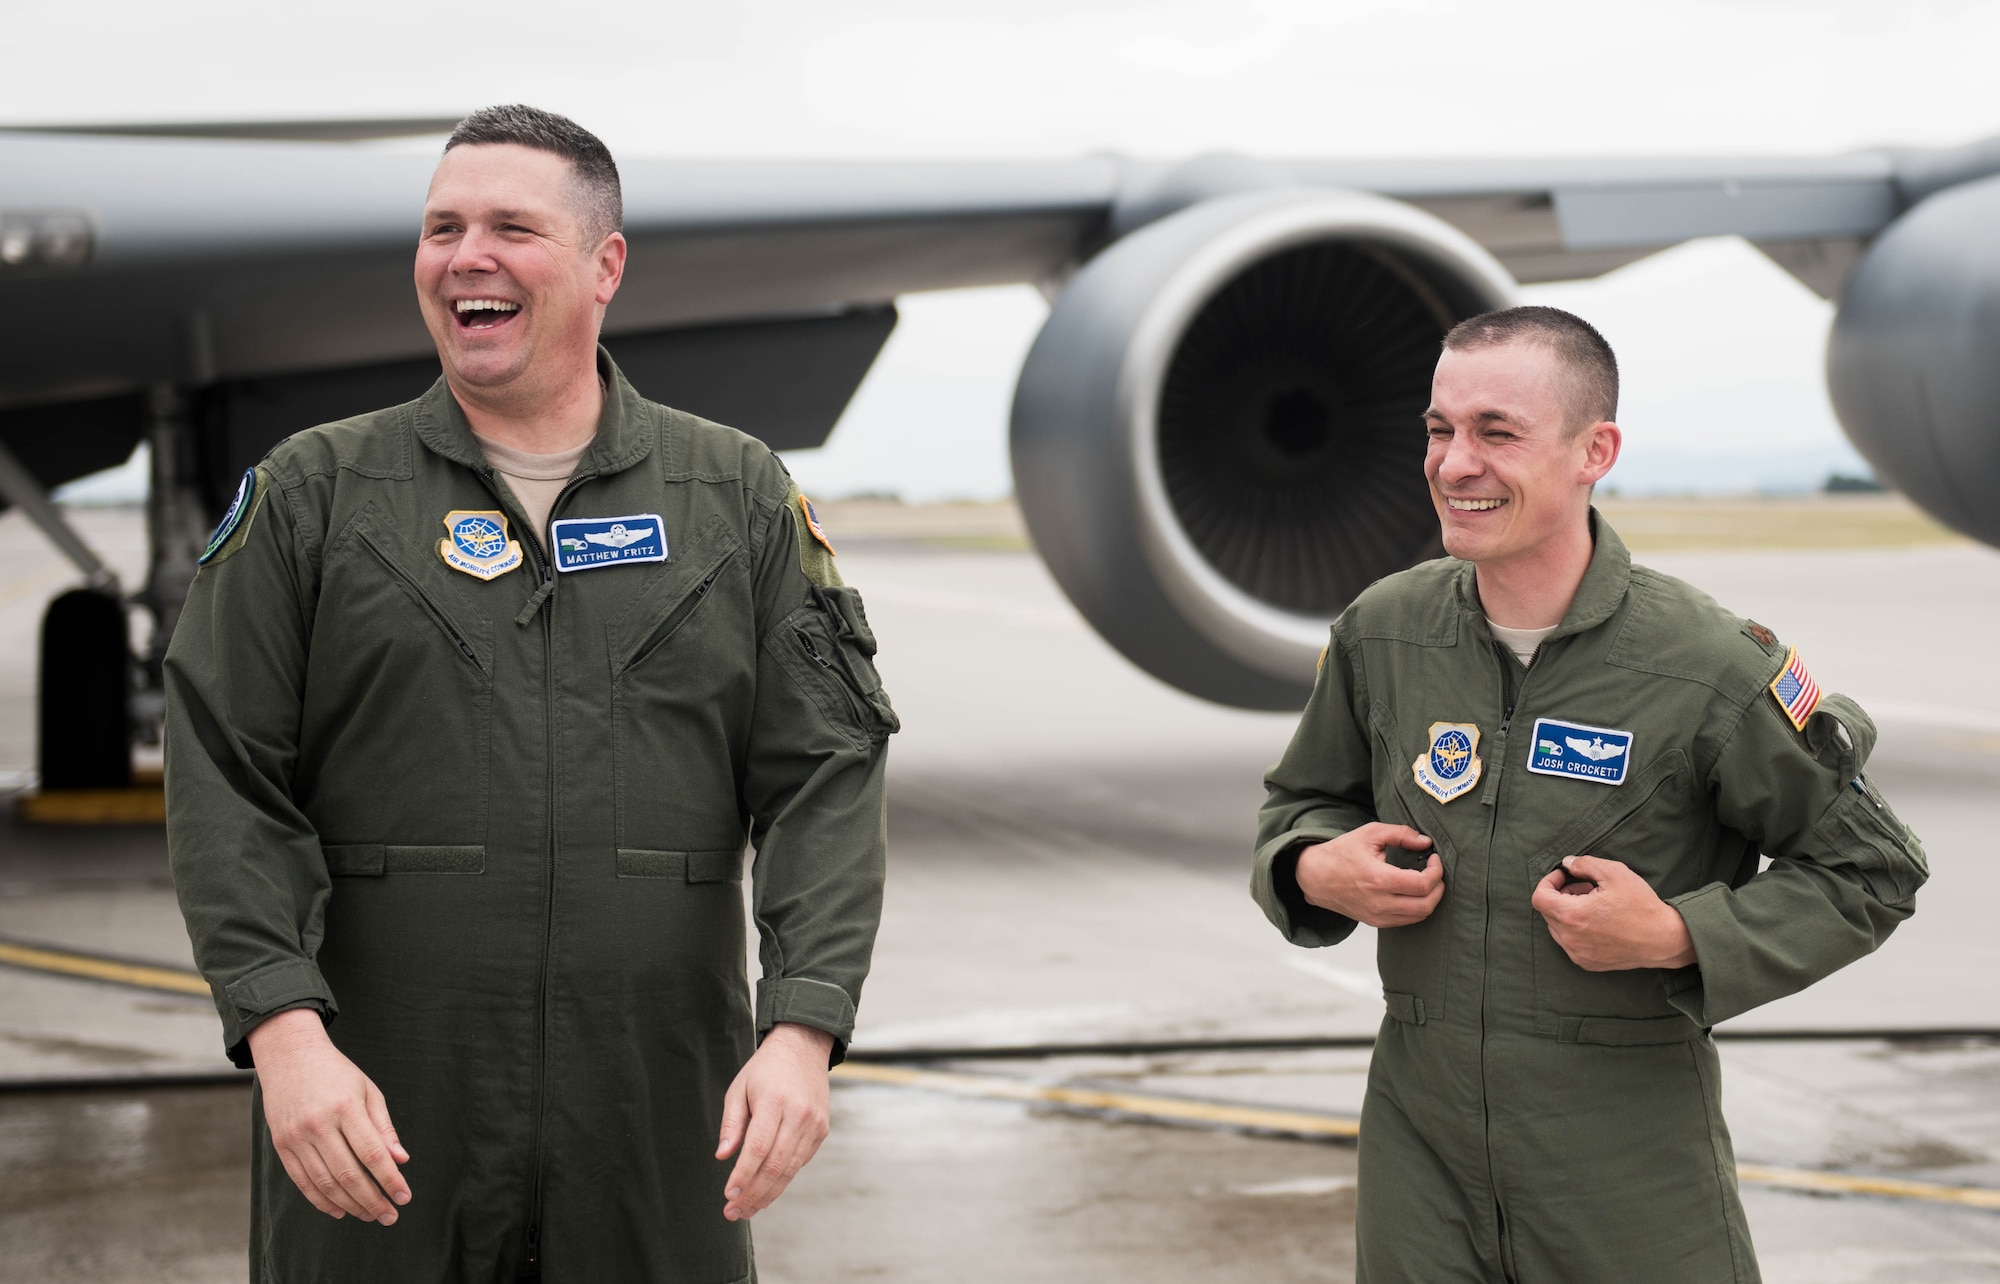 Col. Matthew Fritz, 92nd Air Refueling Wing vice commander, and Maj. Joshua Crockett, 92nd ARW executive officer, laugh following the celebration of Fritz’s final flight June 15, 2017, at Fairchild Air Force Base, Washington. Crockett has worked in the command section since September 2016. (U.S. Air Force photo/Senior Airman Sean Campbell)